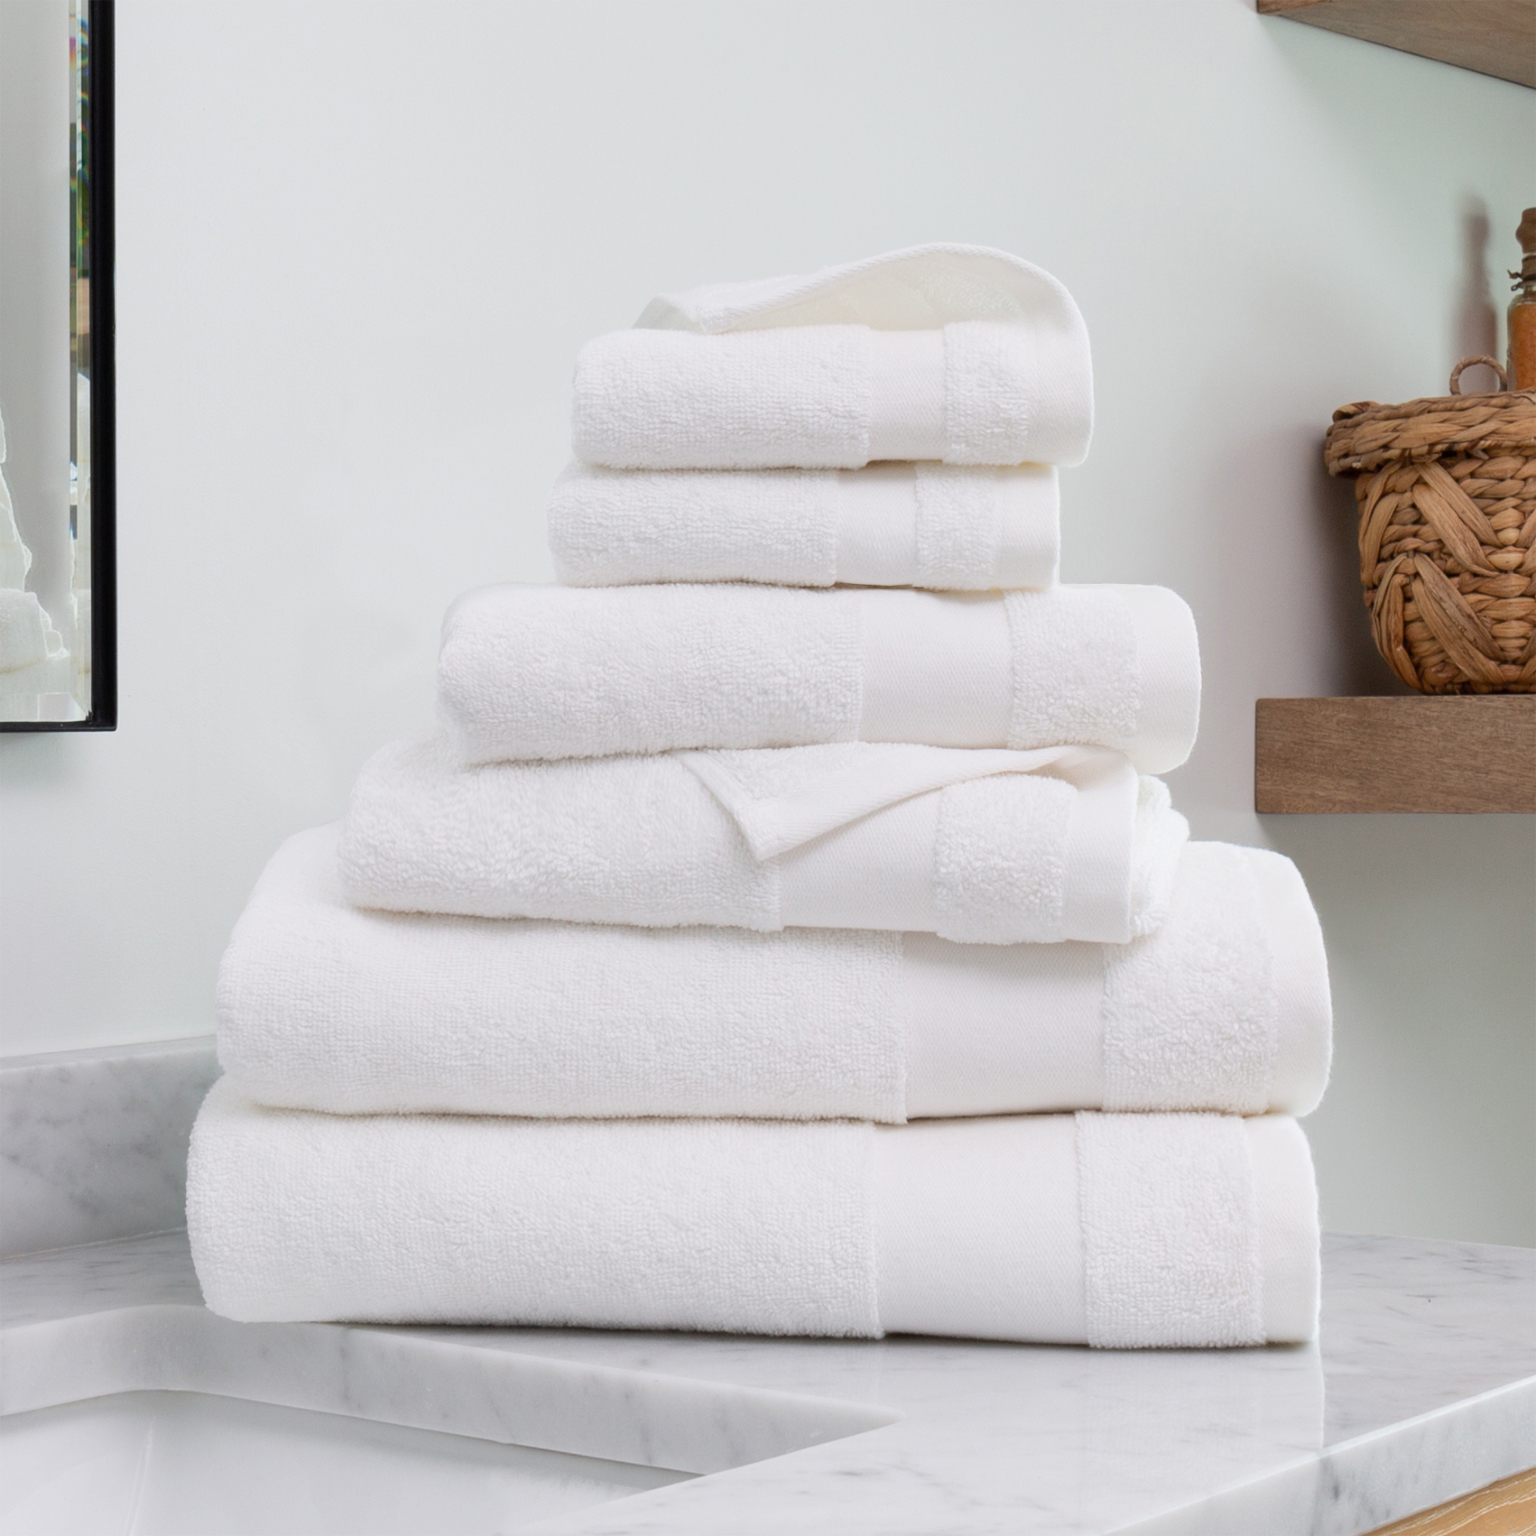 Luxury Hotel Towels for Adults White Cotton Thick Soft Men Body